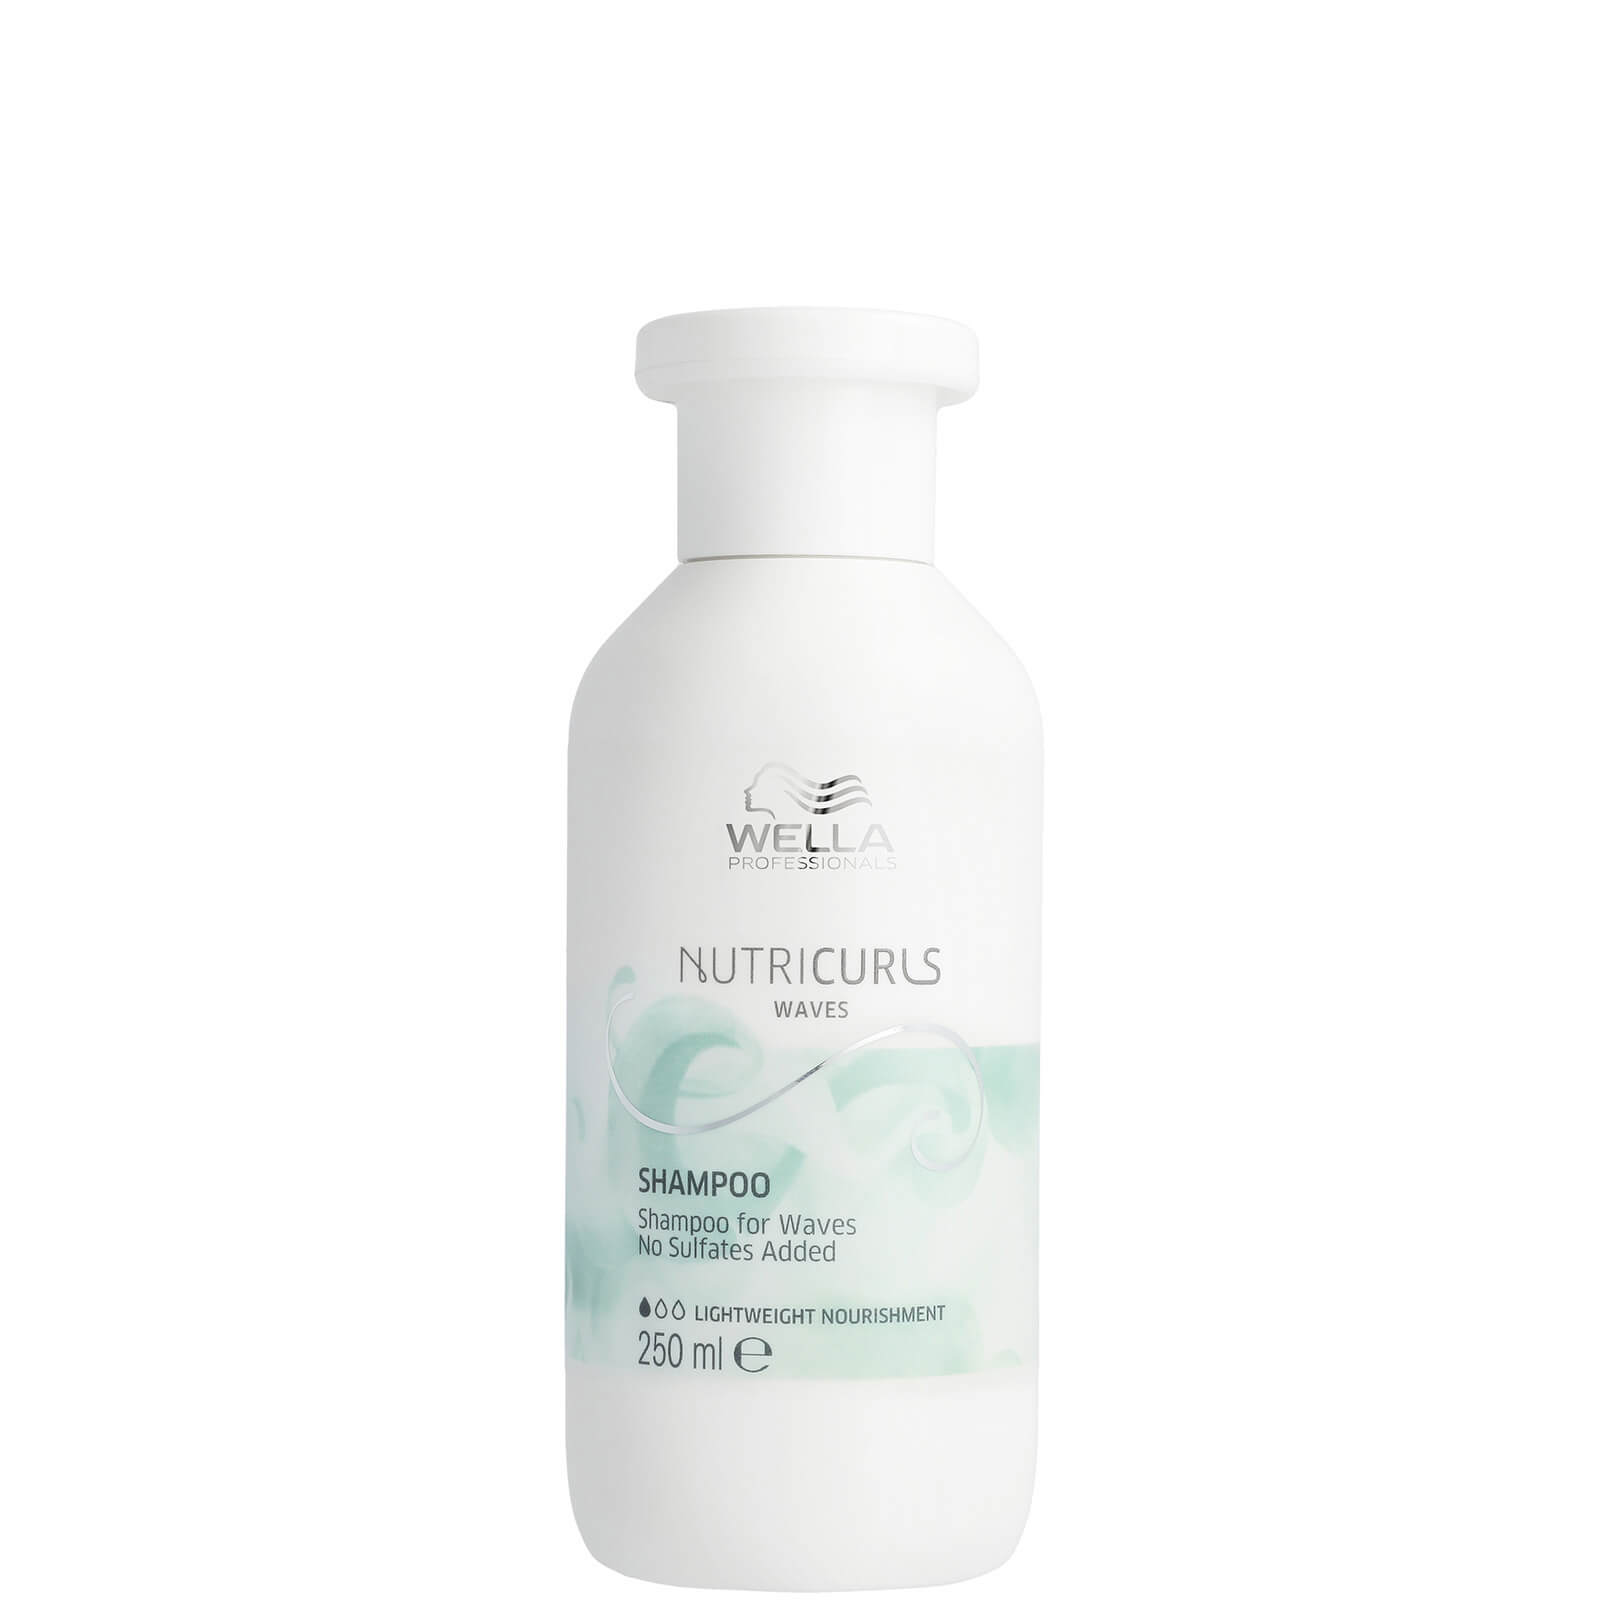 Image of Wella Professionals Nutricurls Shampoo for Waves 250ml